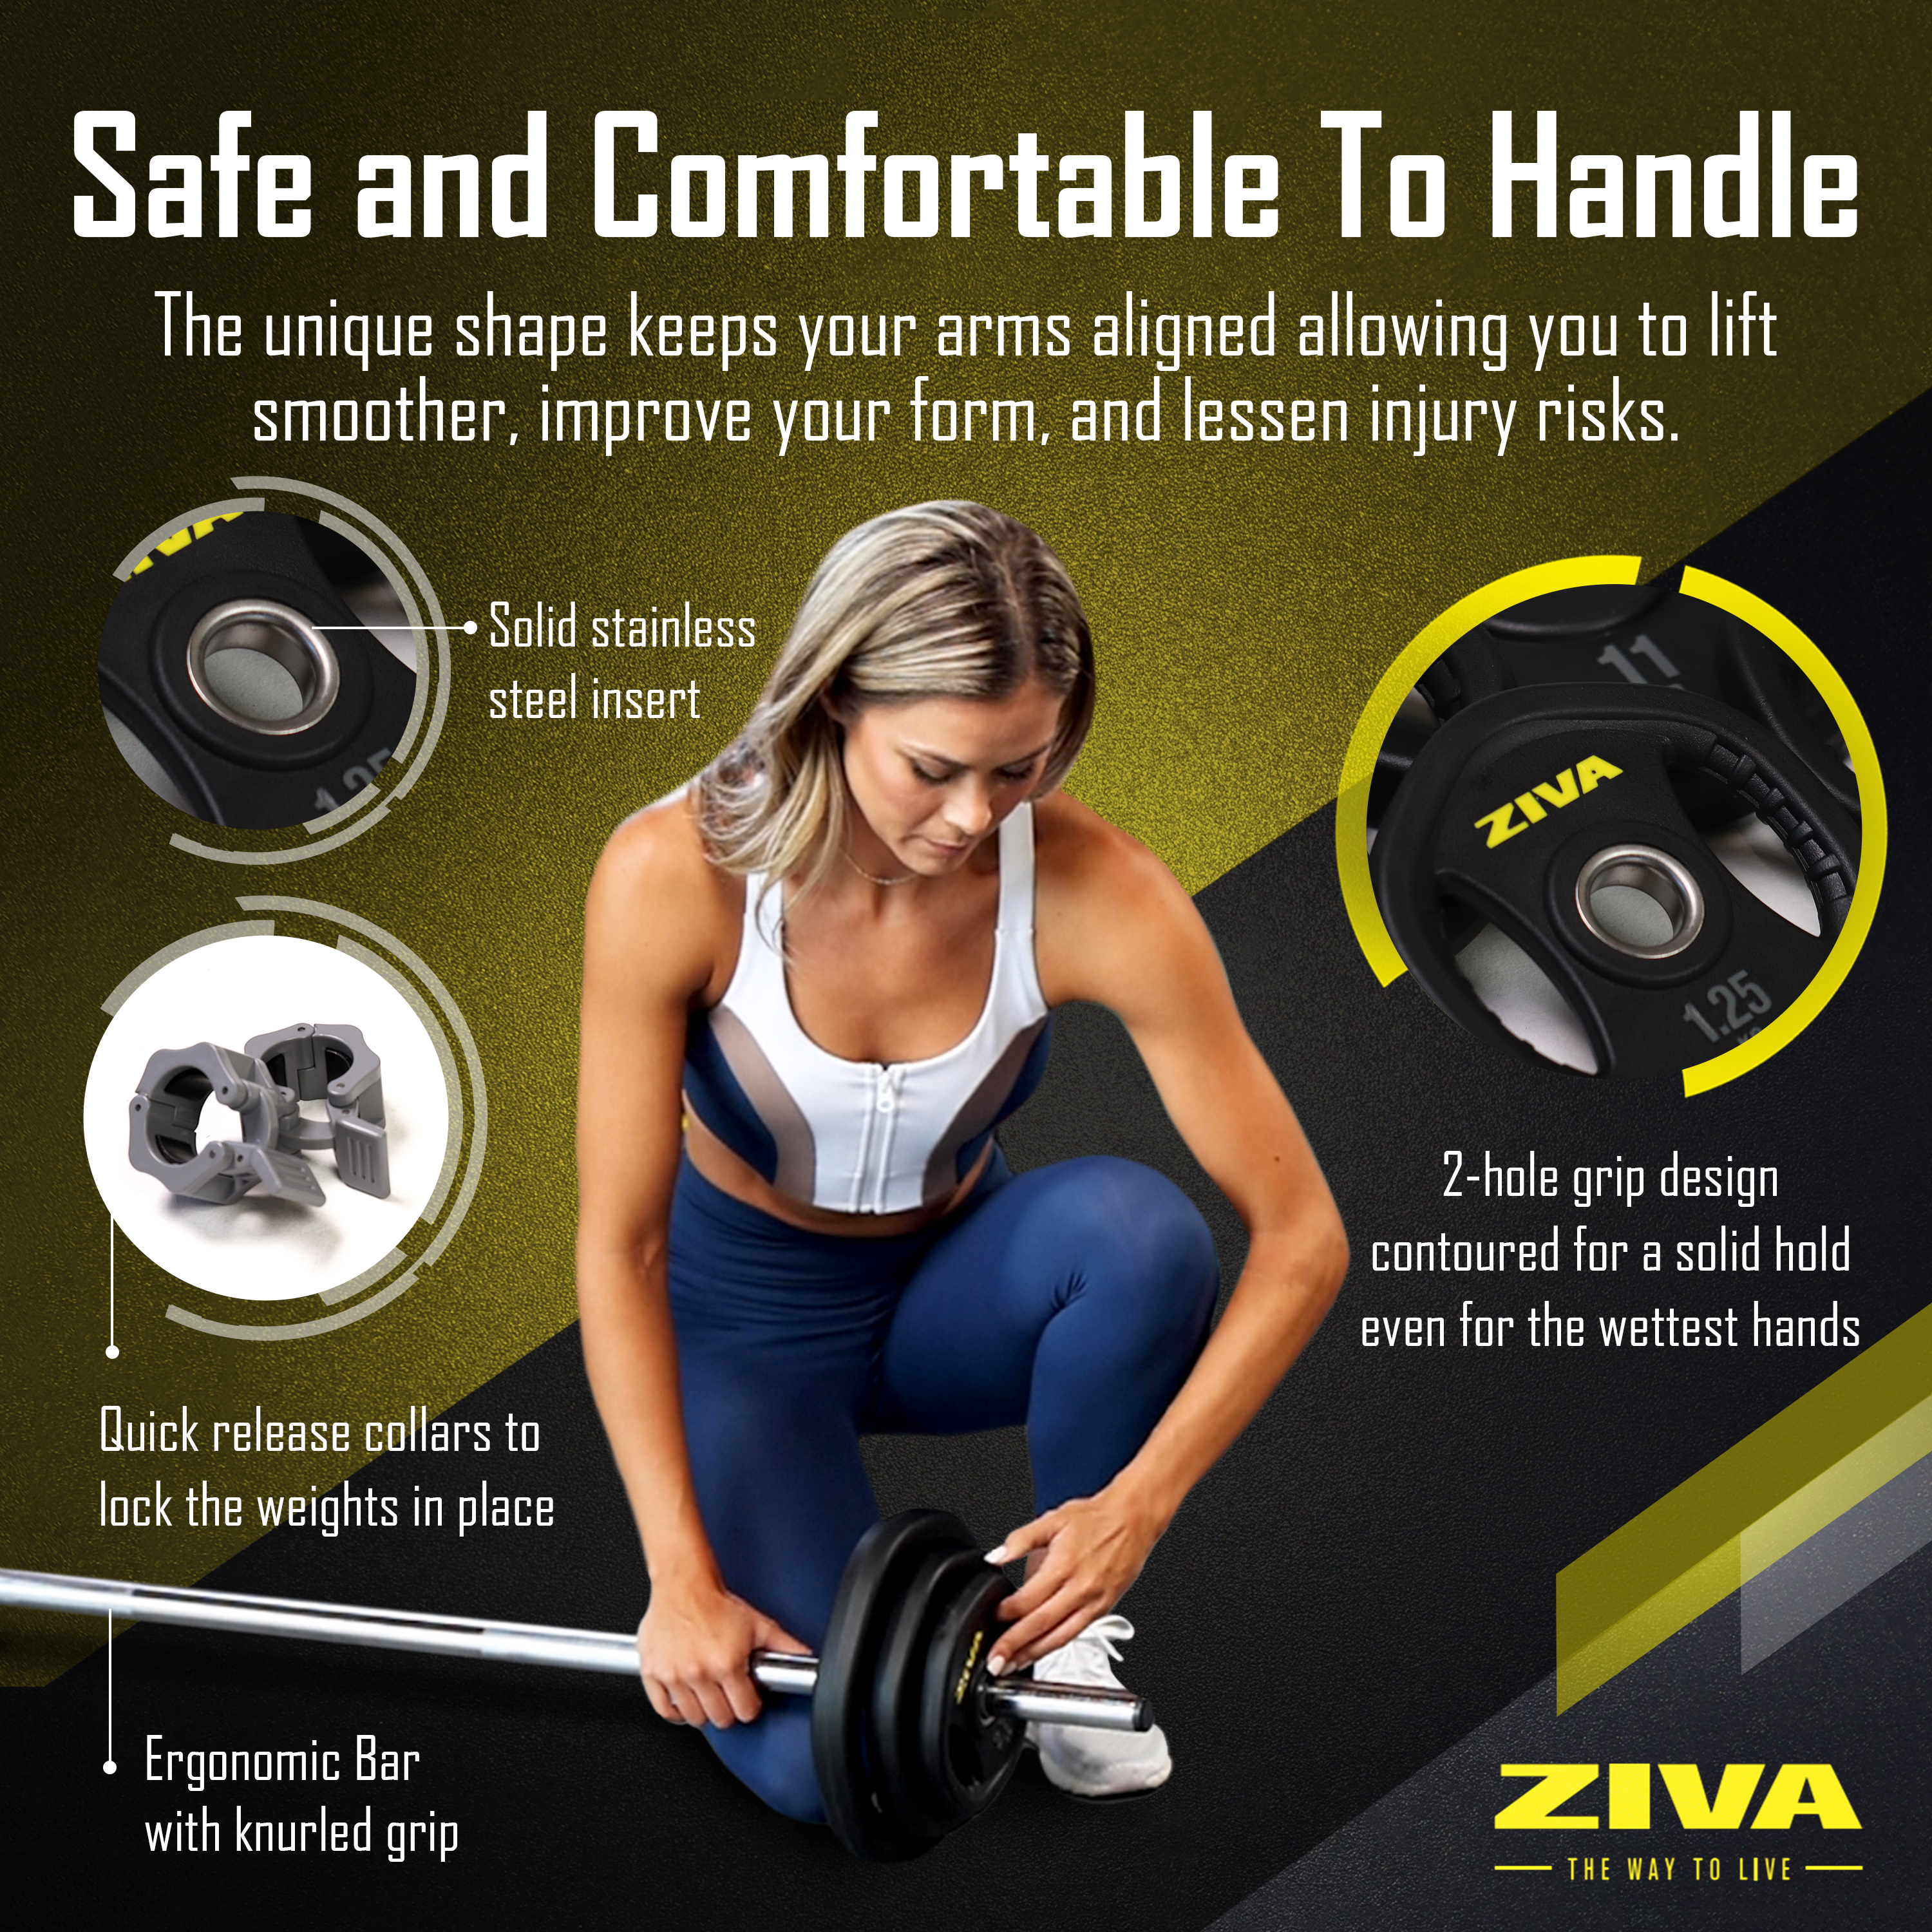 Safe and comfortable to handle. The unique shape keeps your arms aligned allowing you to lift smoother, improve your form, and lessen injury risks. Solid stainless steel insert. Quick release collars to lock the weights in place. Ergonomic bar with knurled grip. 2-hole grip design contoured for a solid hold even for the wettest hands.